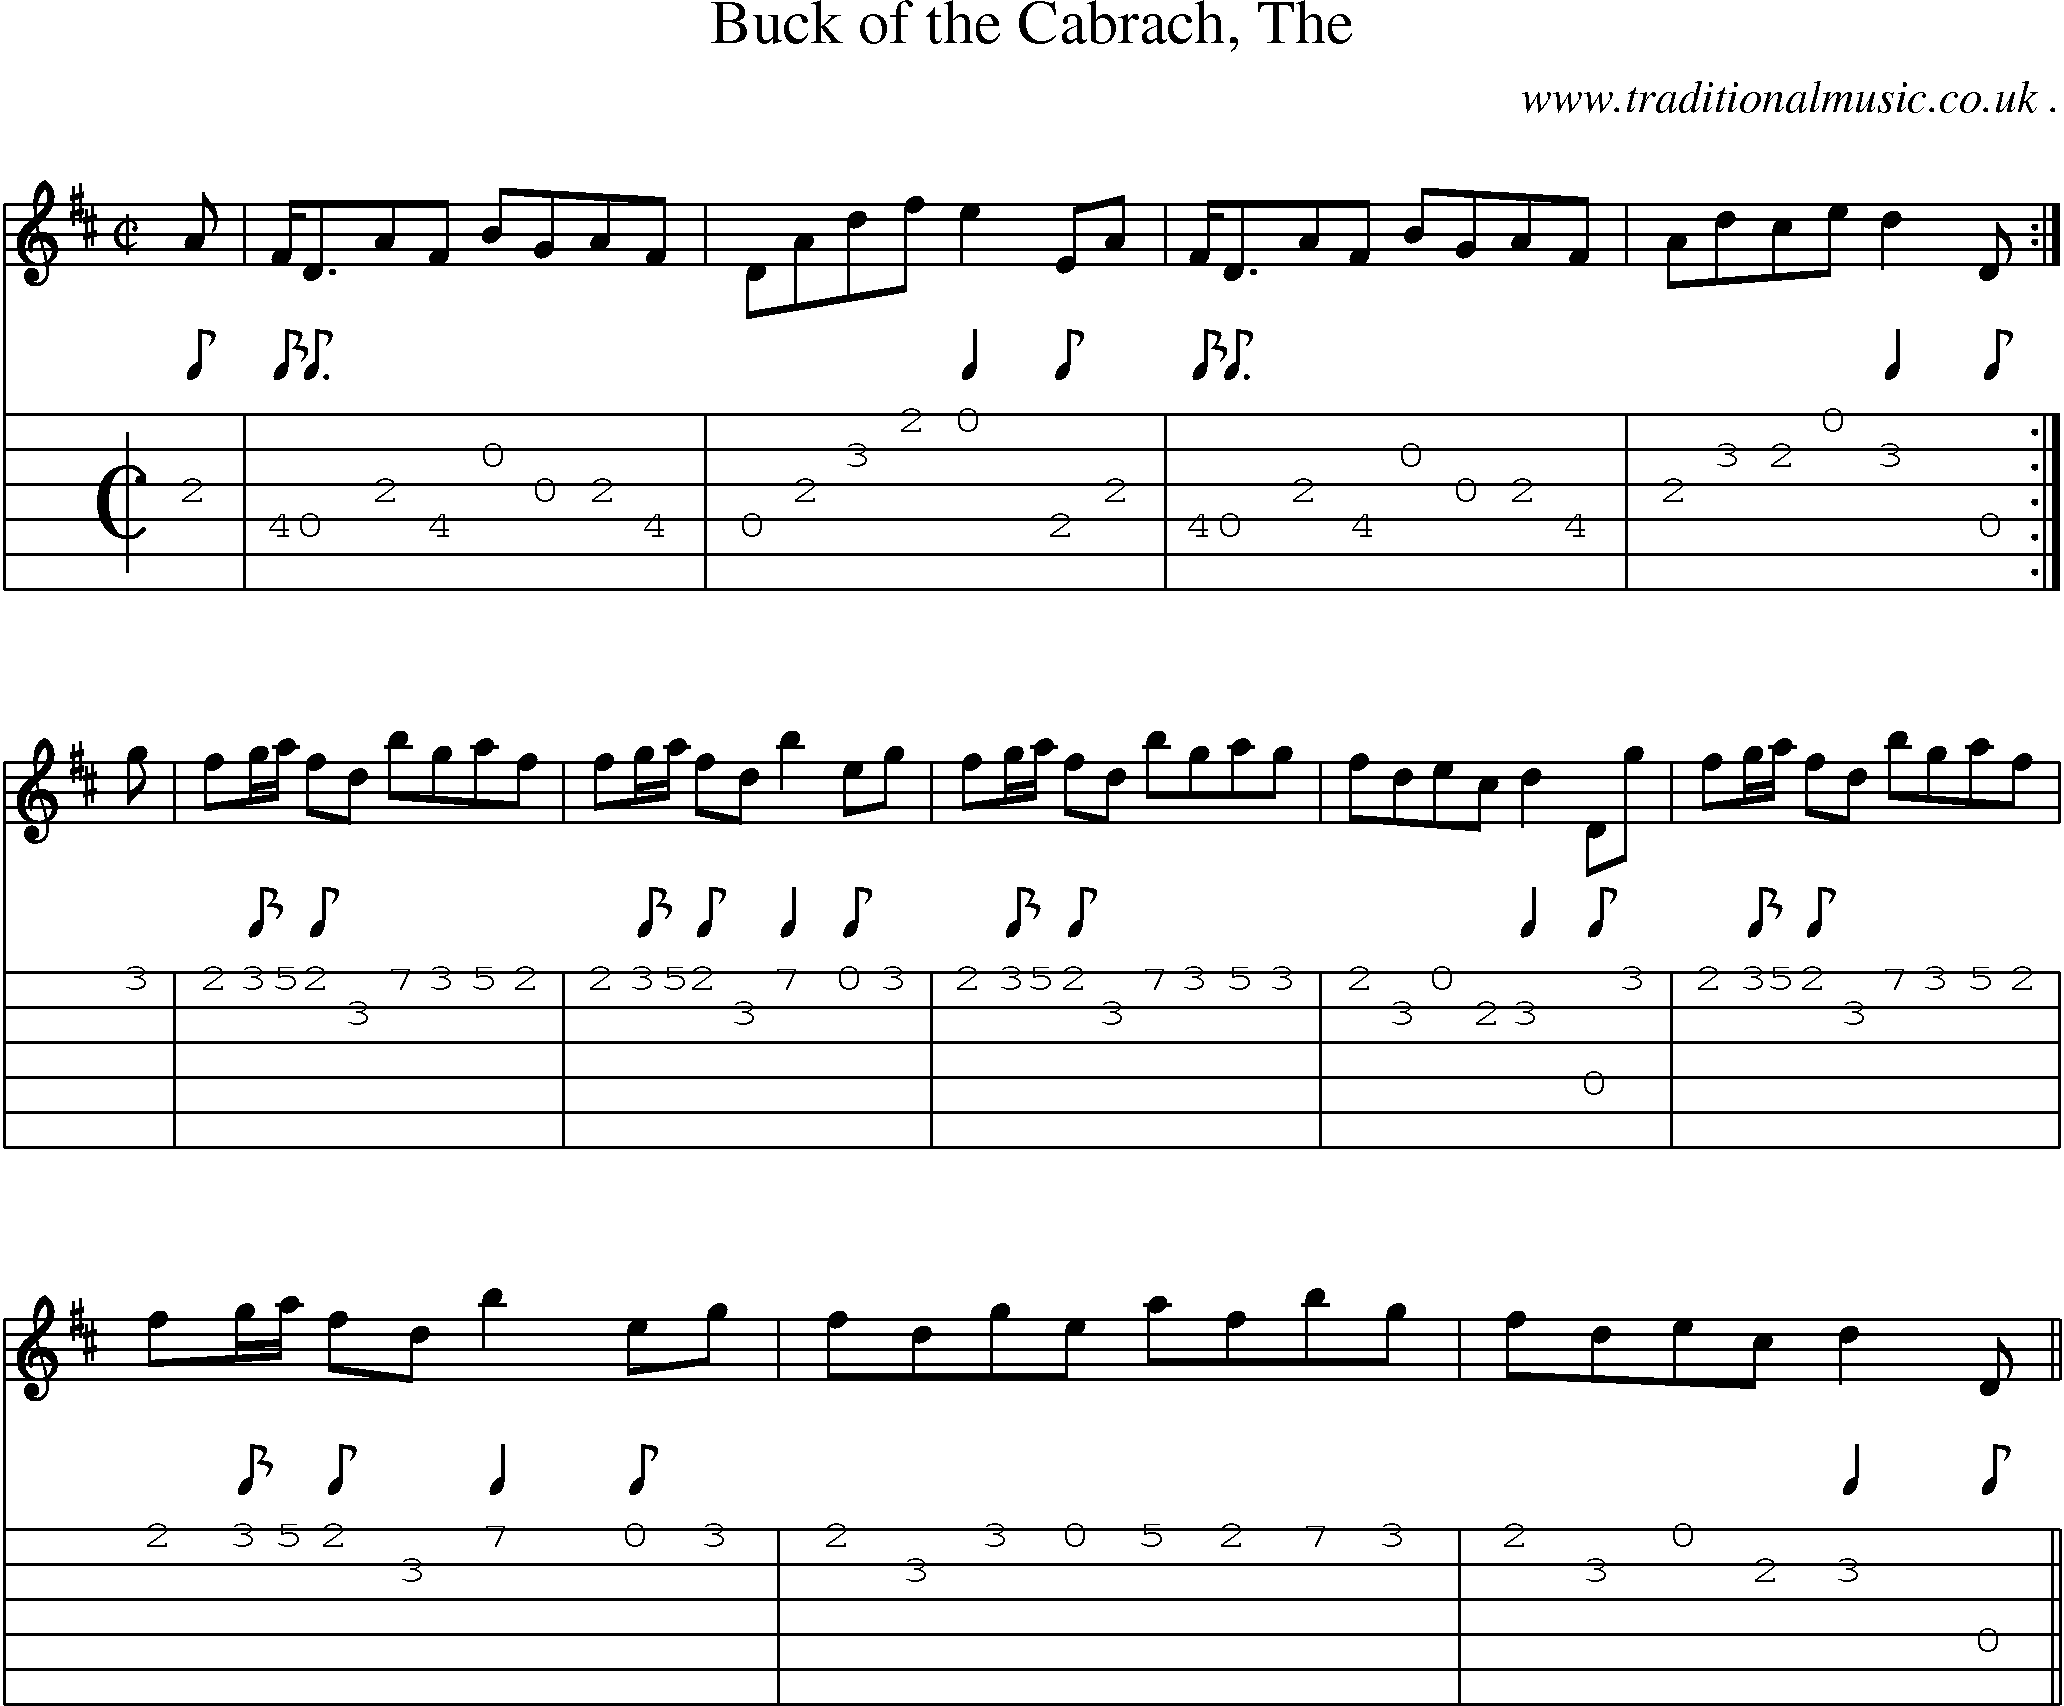 Sheet-music  score, Chords and Guitar Tabs for Buck Of The Cabrach The